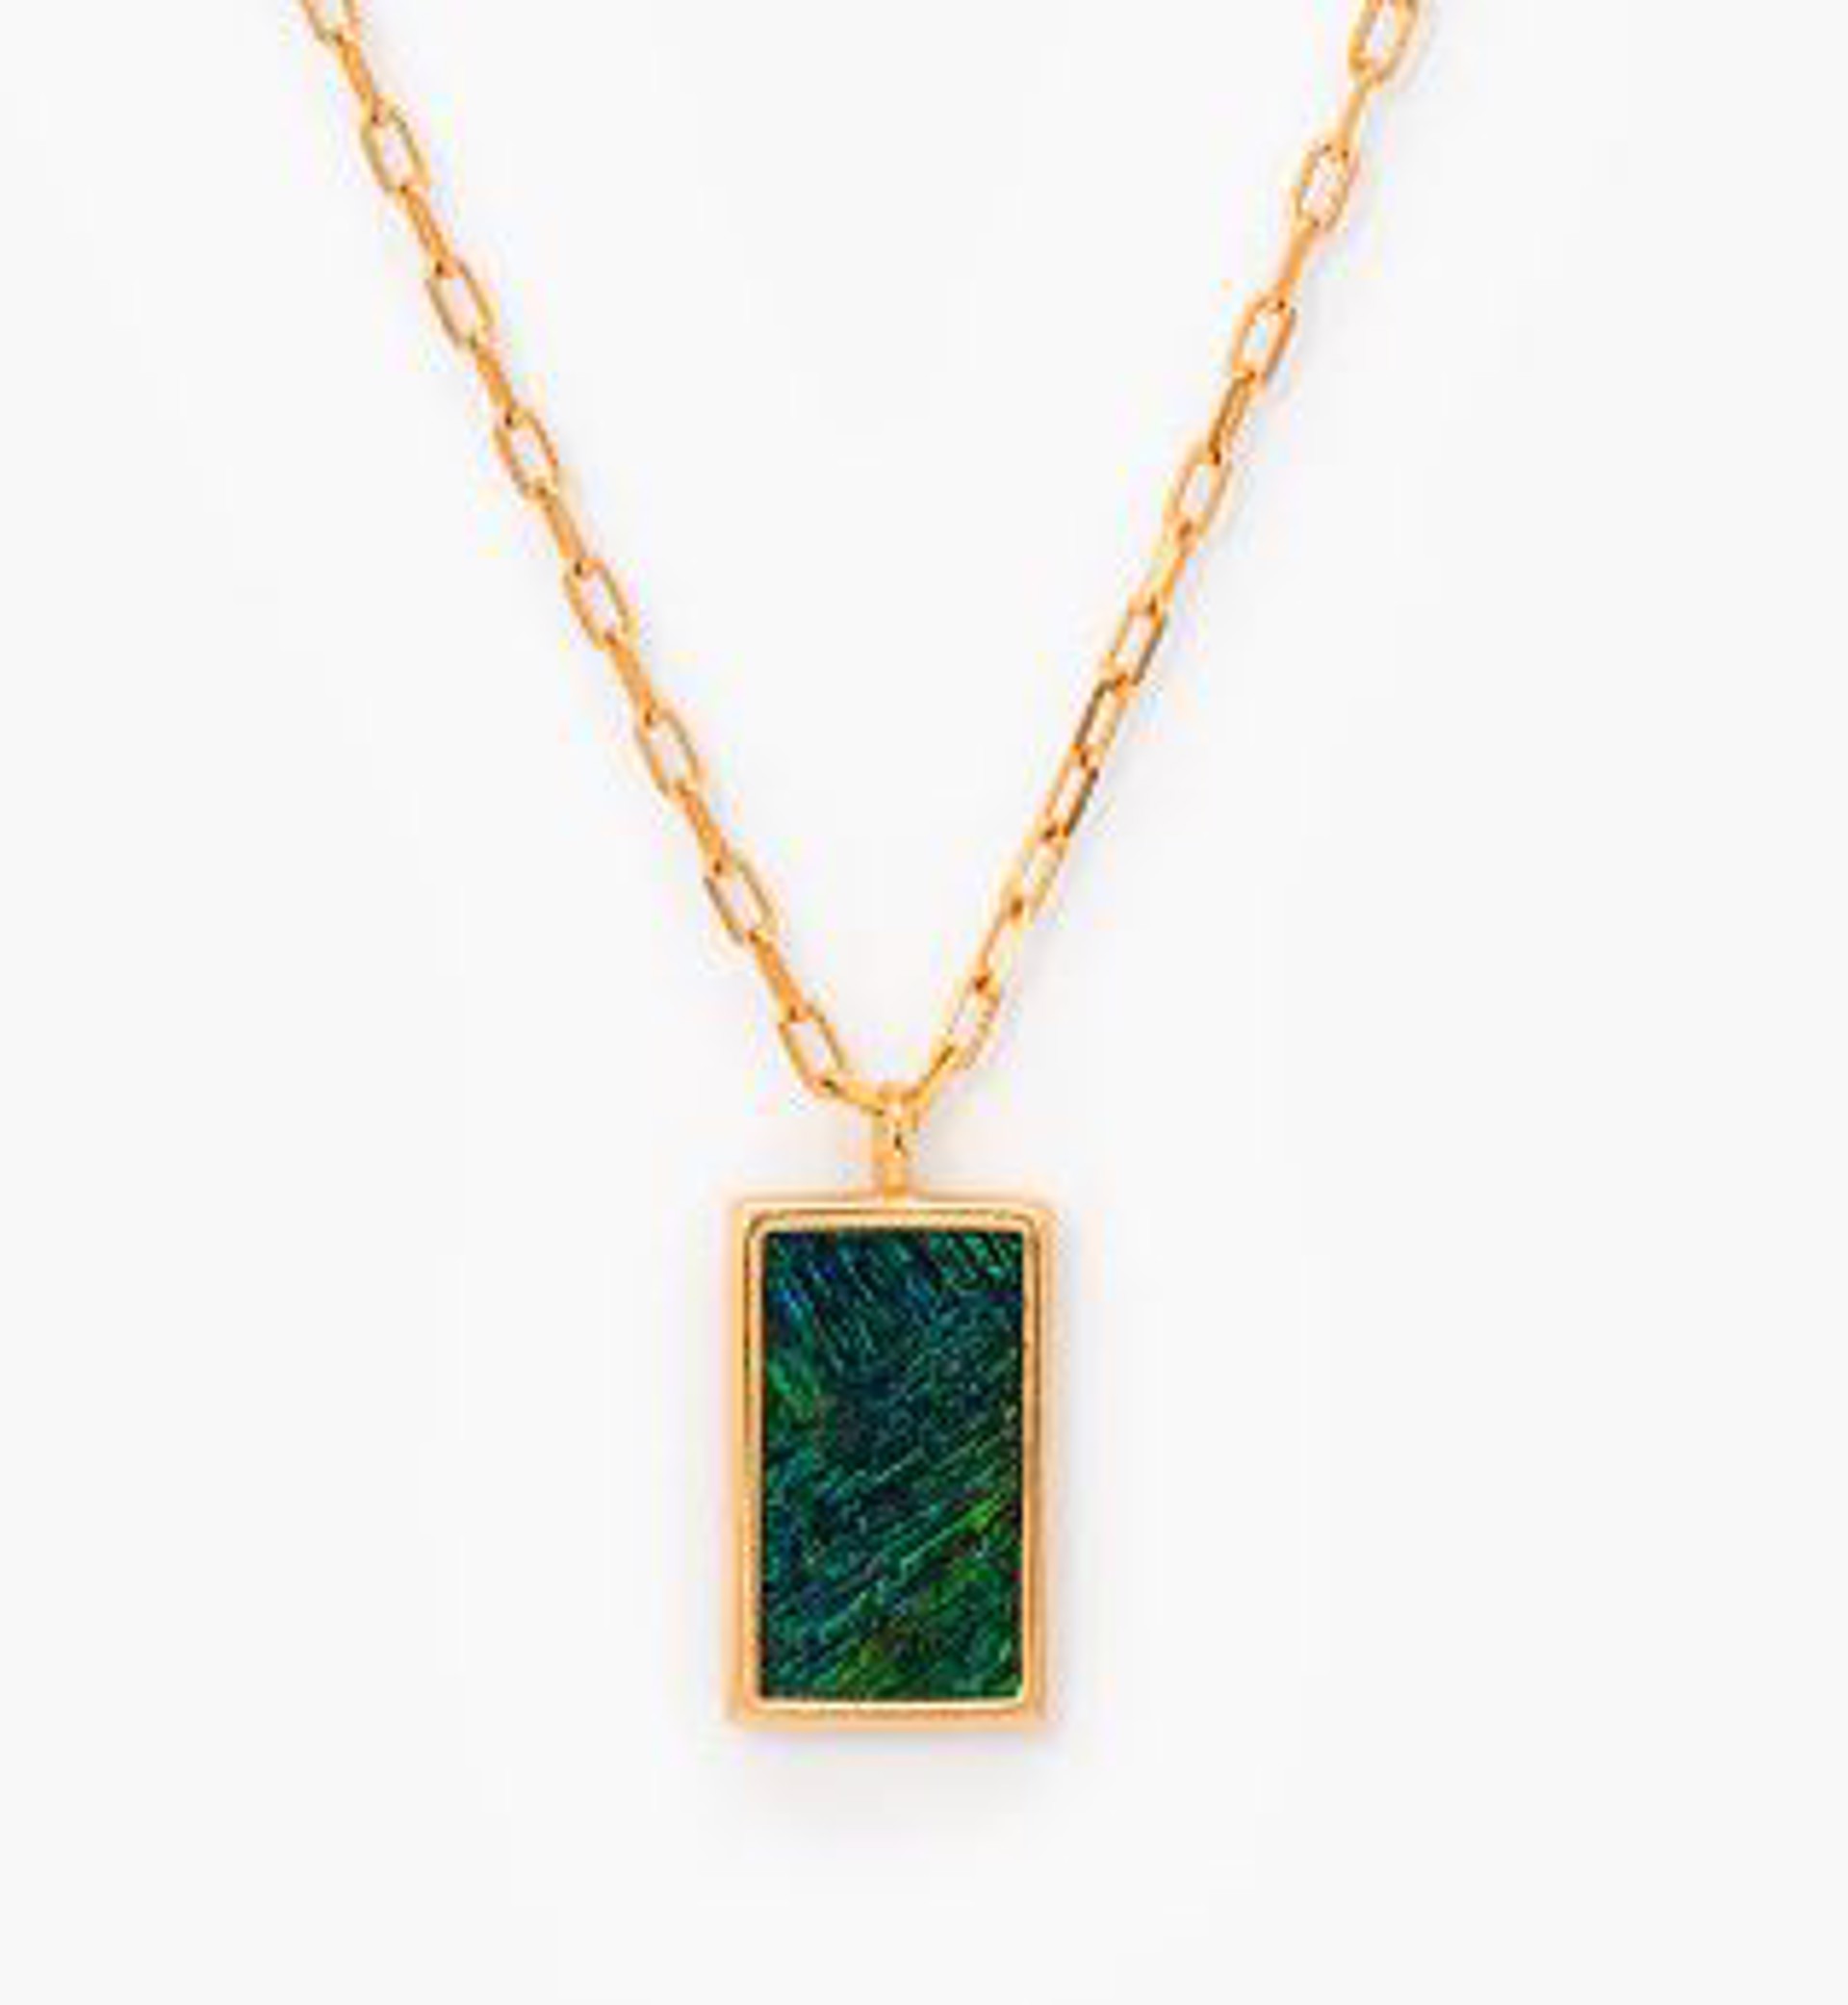 Cool Water Necklace - Peacock by Brackish